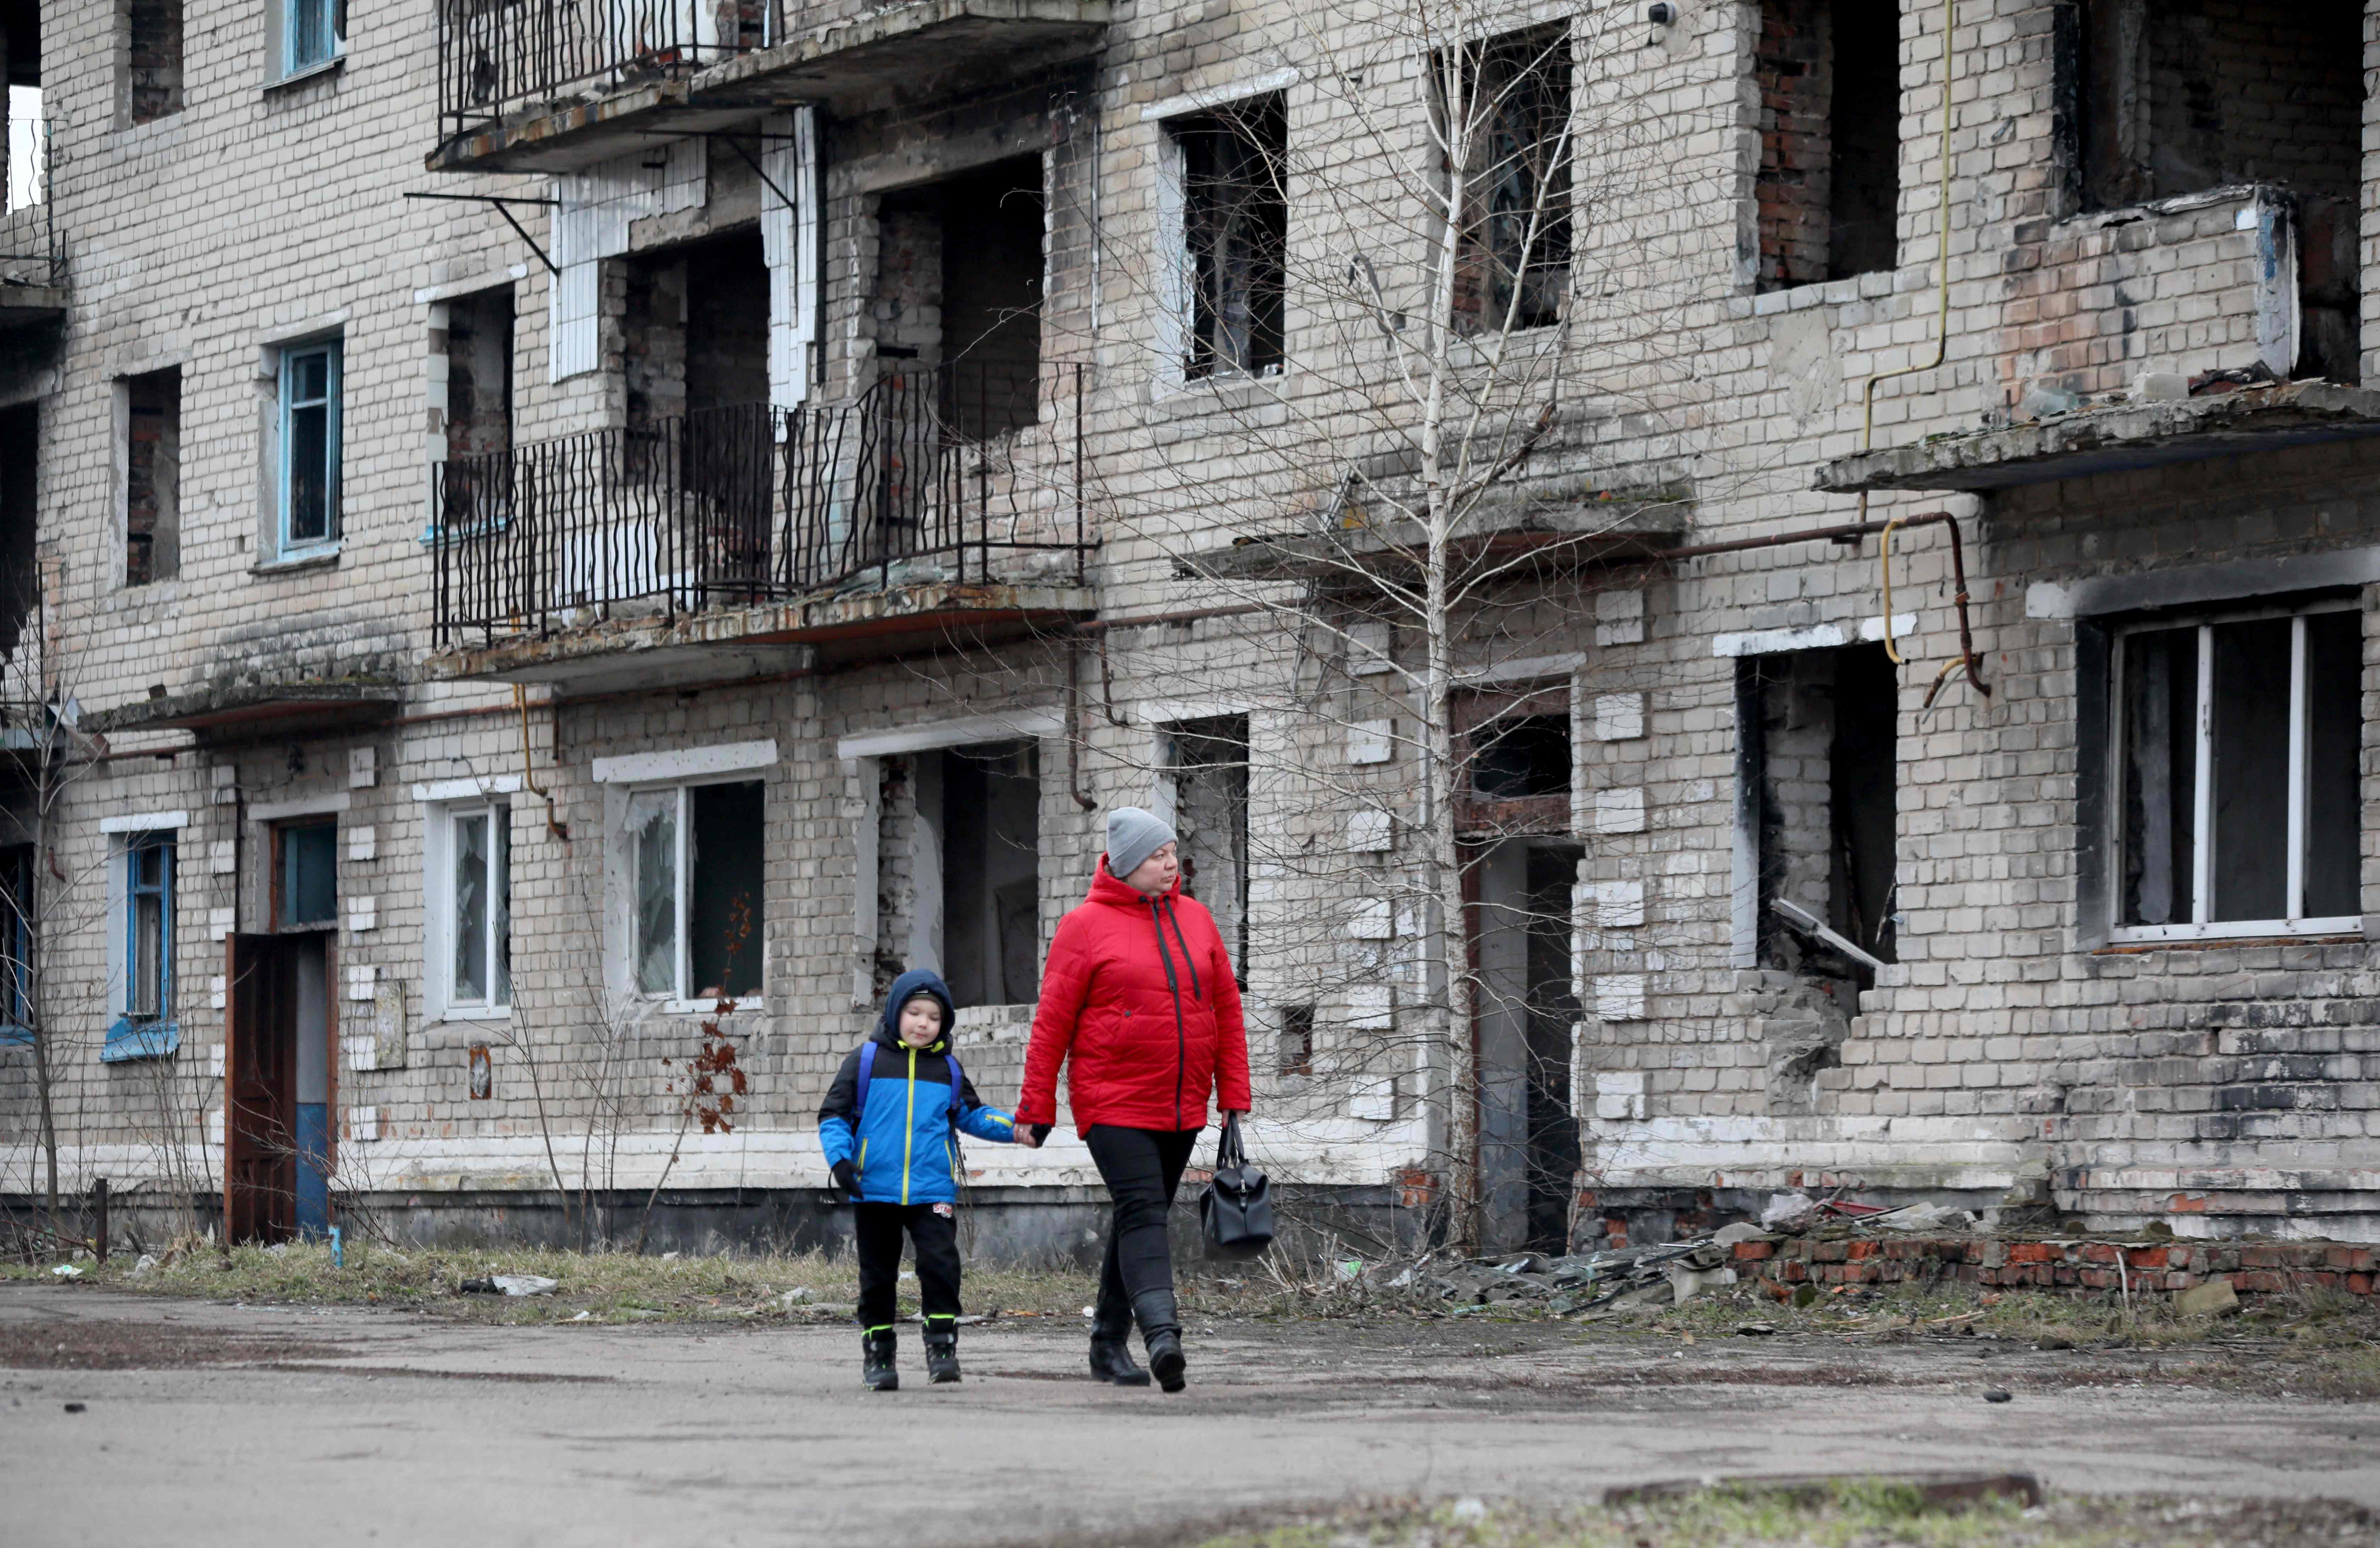 A woman with a boy walk past an old destroyed building in the small town of Krasnogorivka, Donetsk